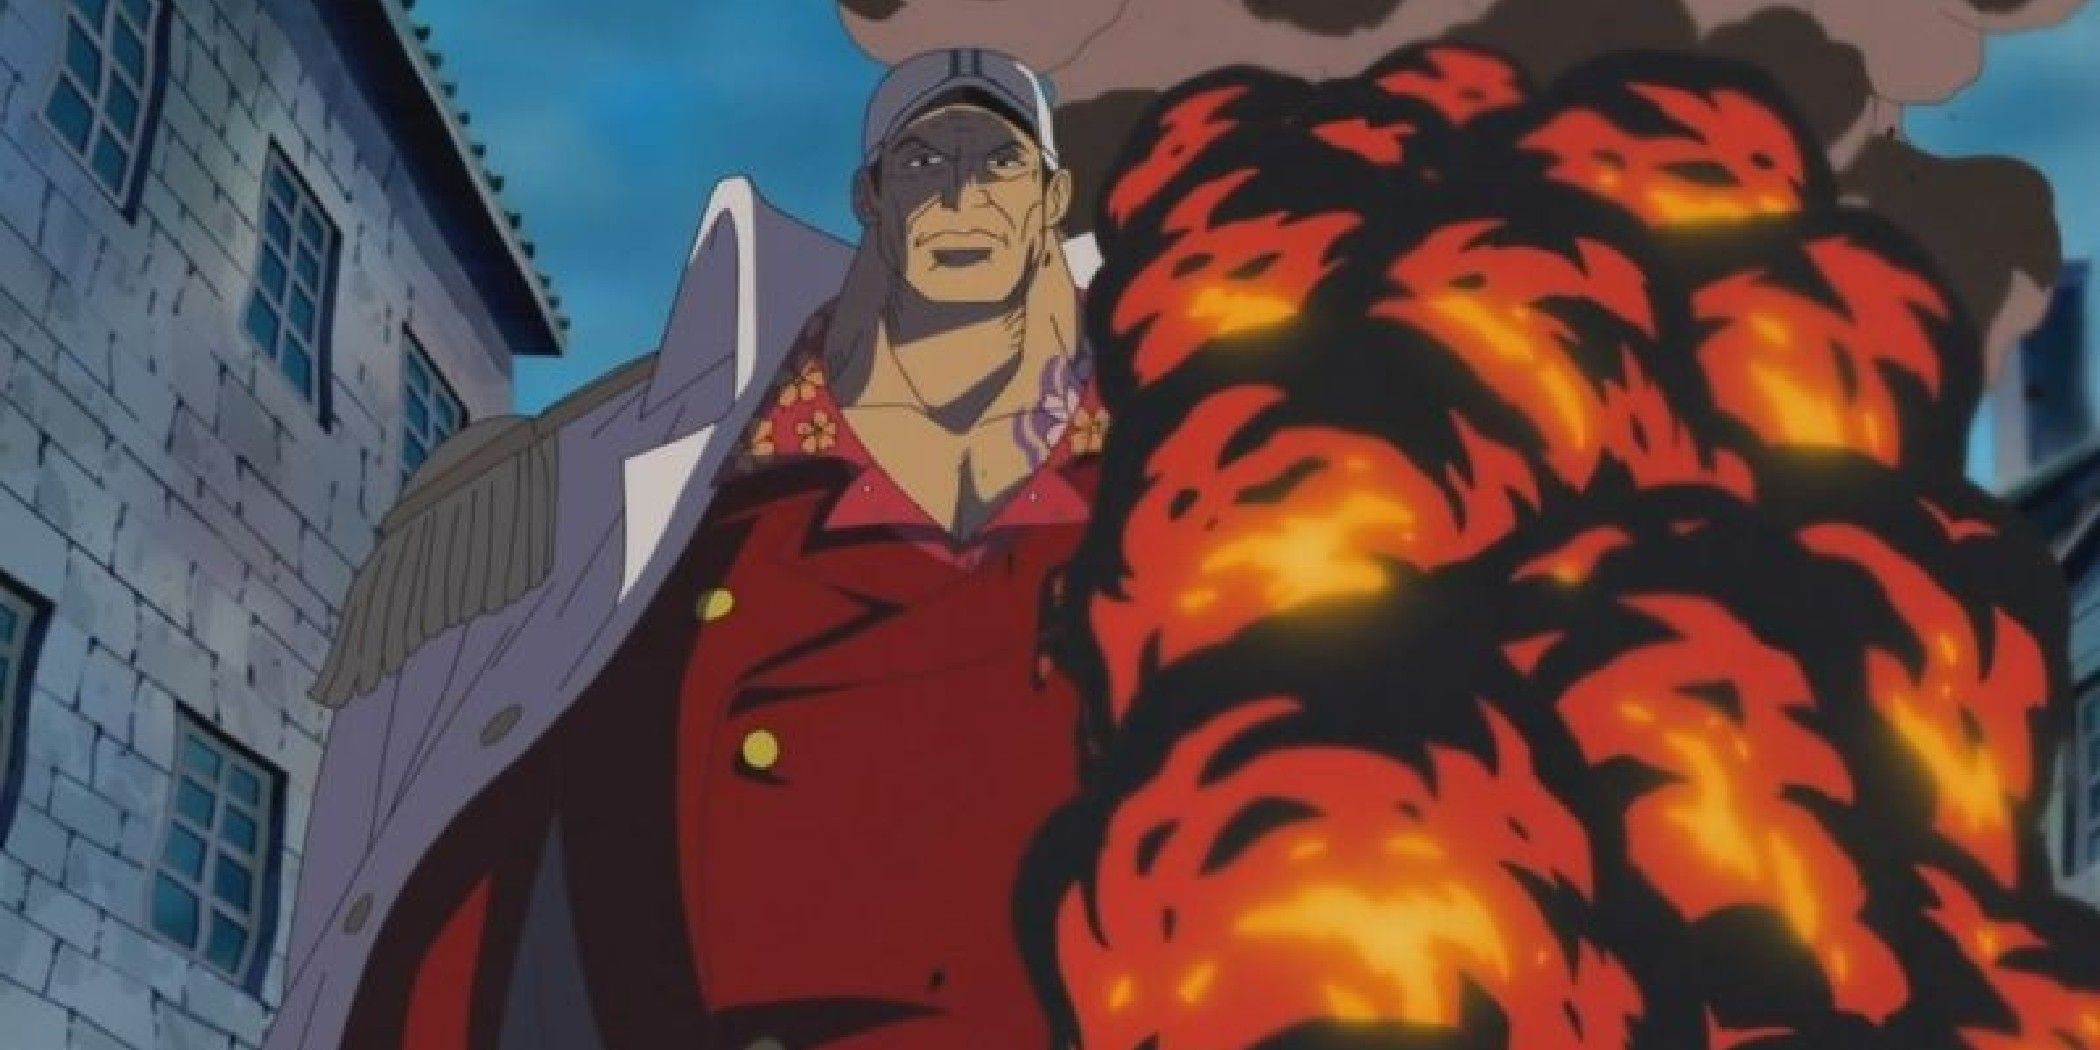 Akainu with his left side engulfed in magma